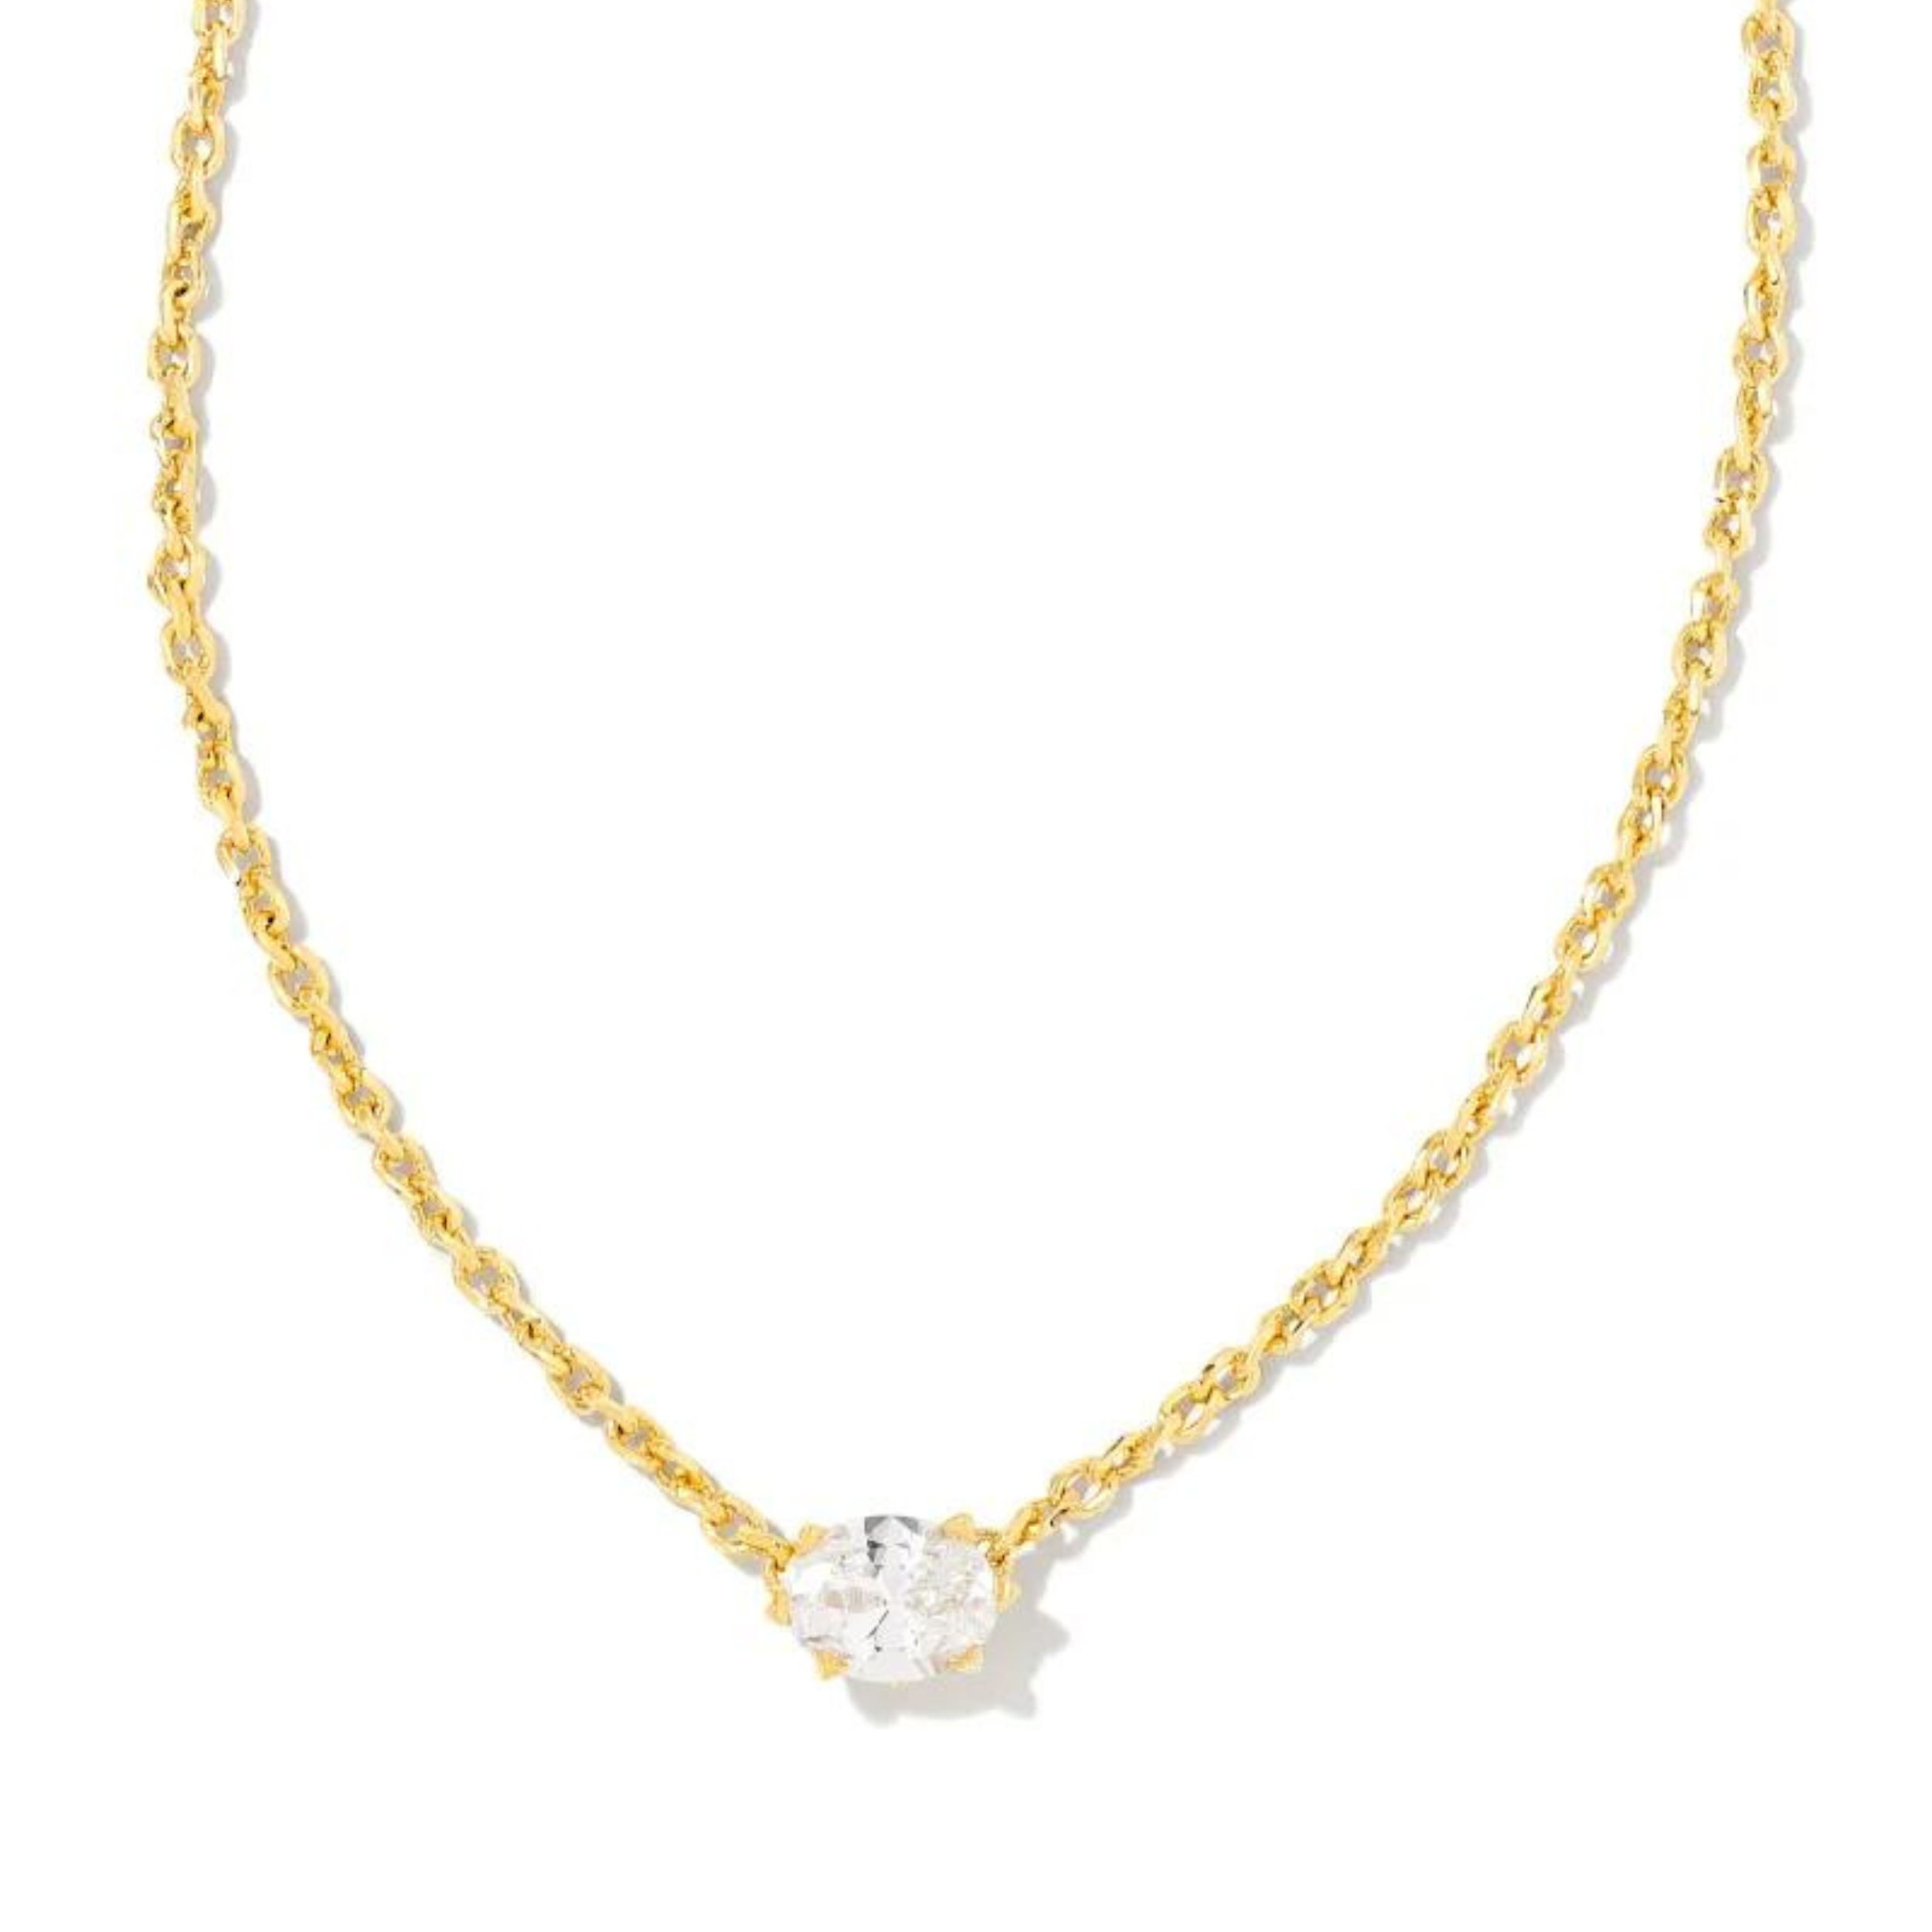 Gold necklace with white crystal stone, pictured on a white background.